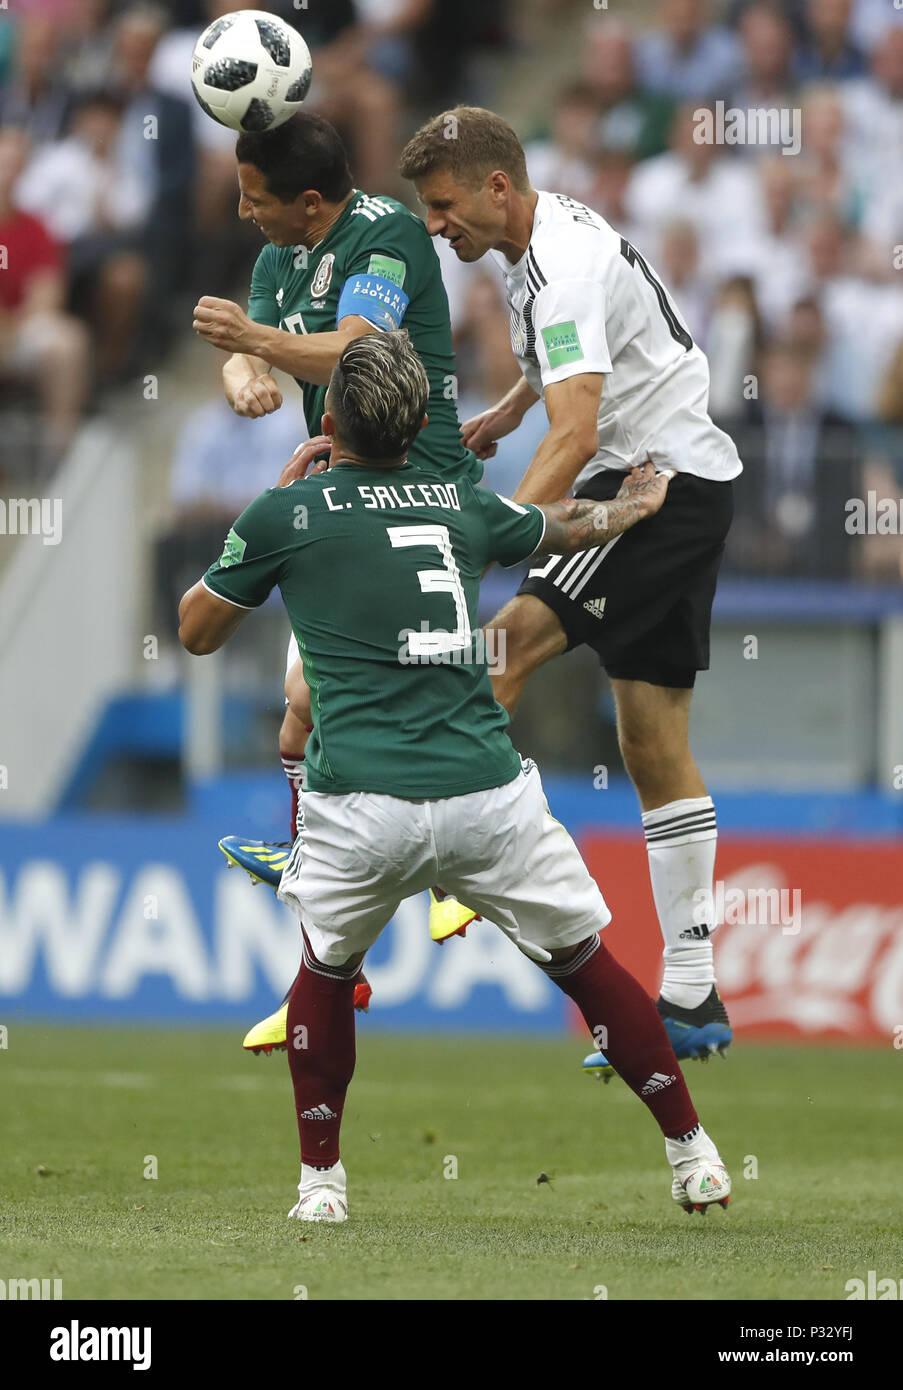 Moscow, Russia. 17th June, 2018. Thomas Mueller (R) of Germany competes for a header with Andres Guardado (L) of Mexico during a group F match between Germany and Mexico at the 2018 FIFA World Cup in Moscow, Russia, June 17, 2018. Credit: Cao Can/Xinhua/Alamy Live News Stock Photo